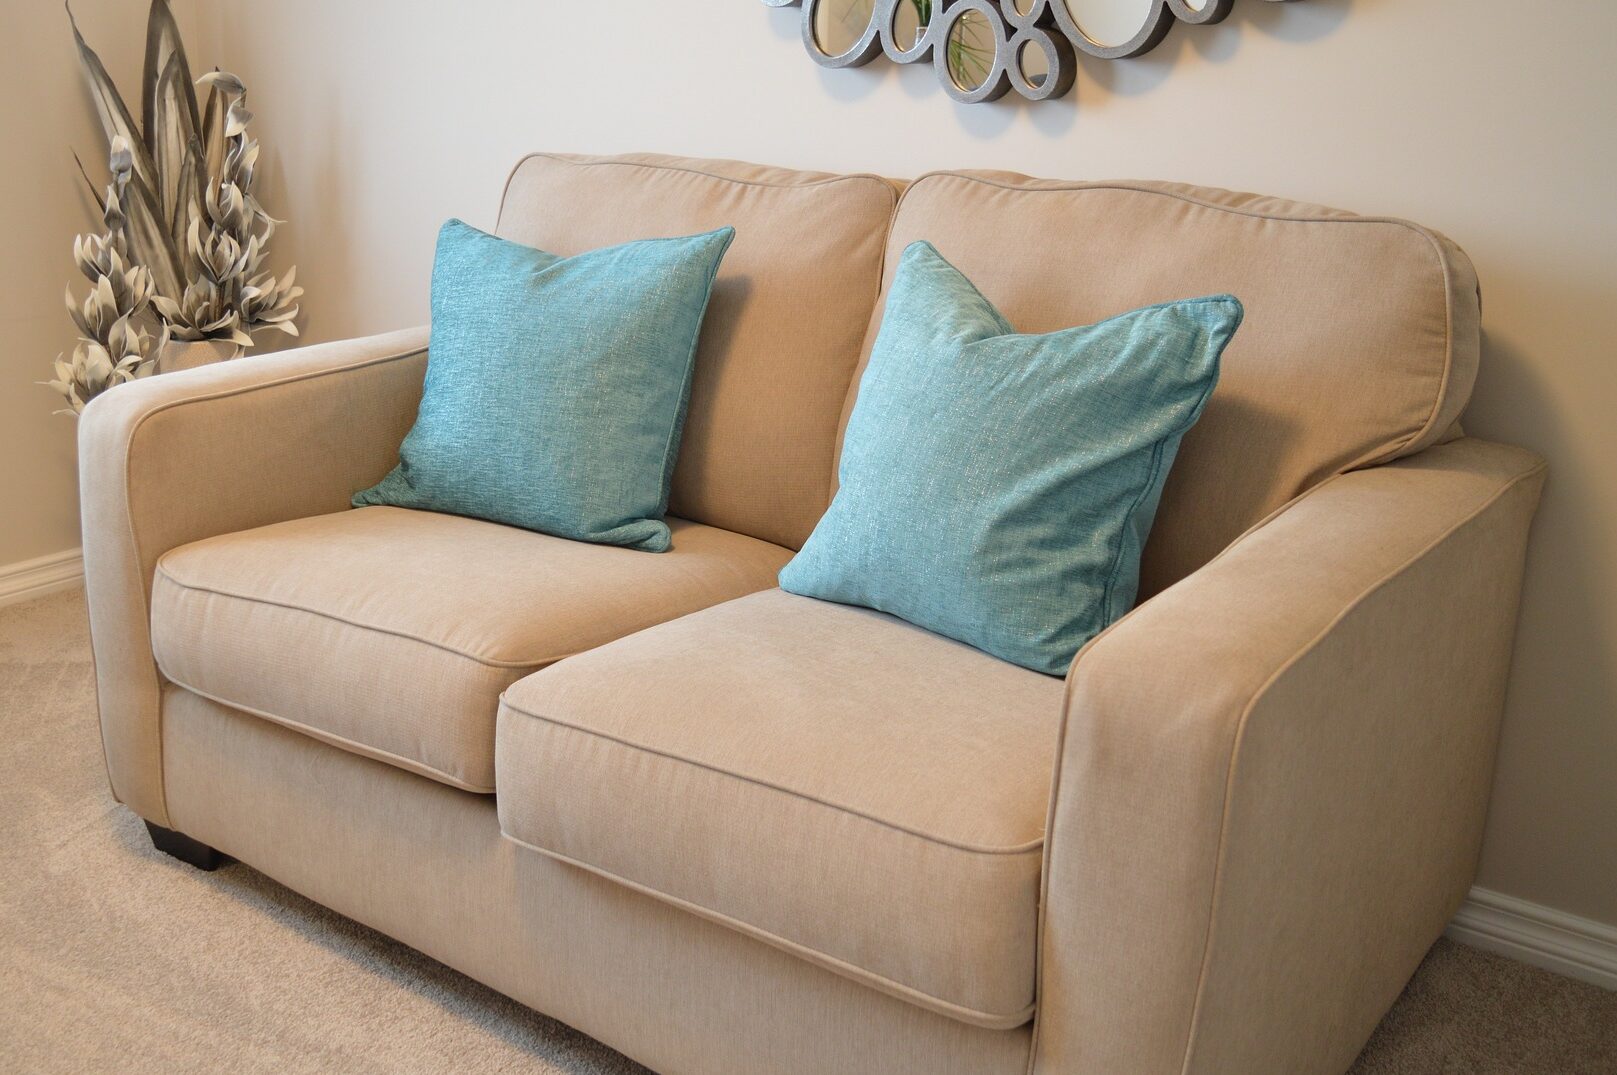 picture of a small brown couch with blue pillows